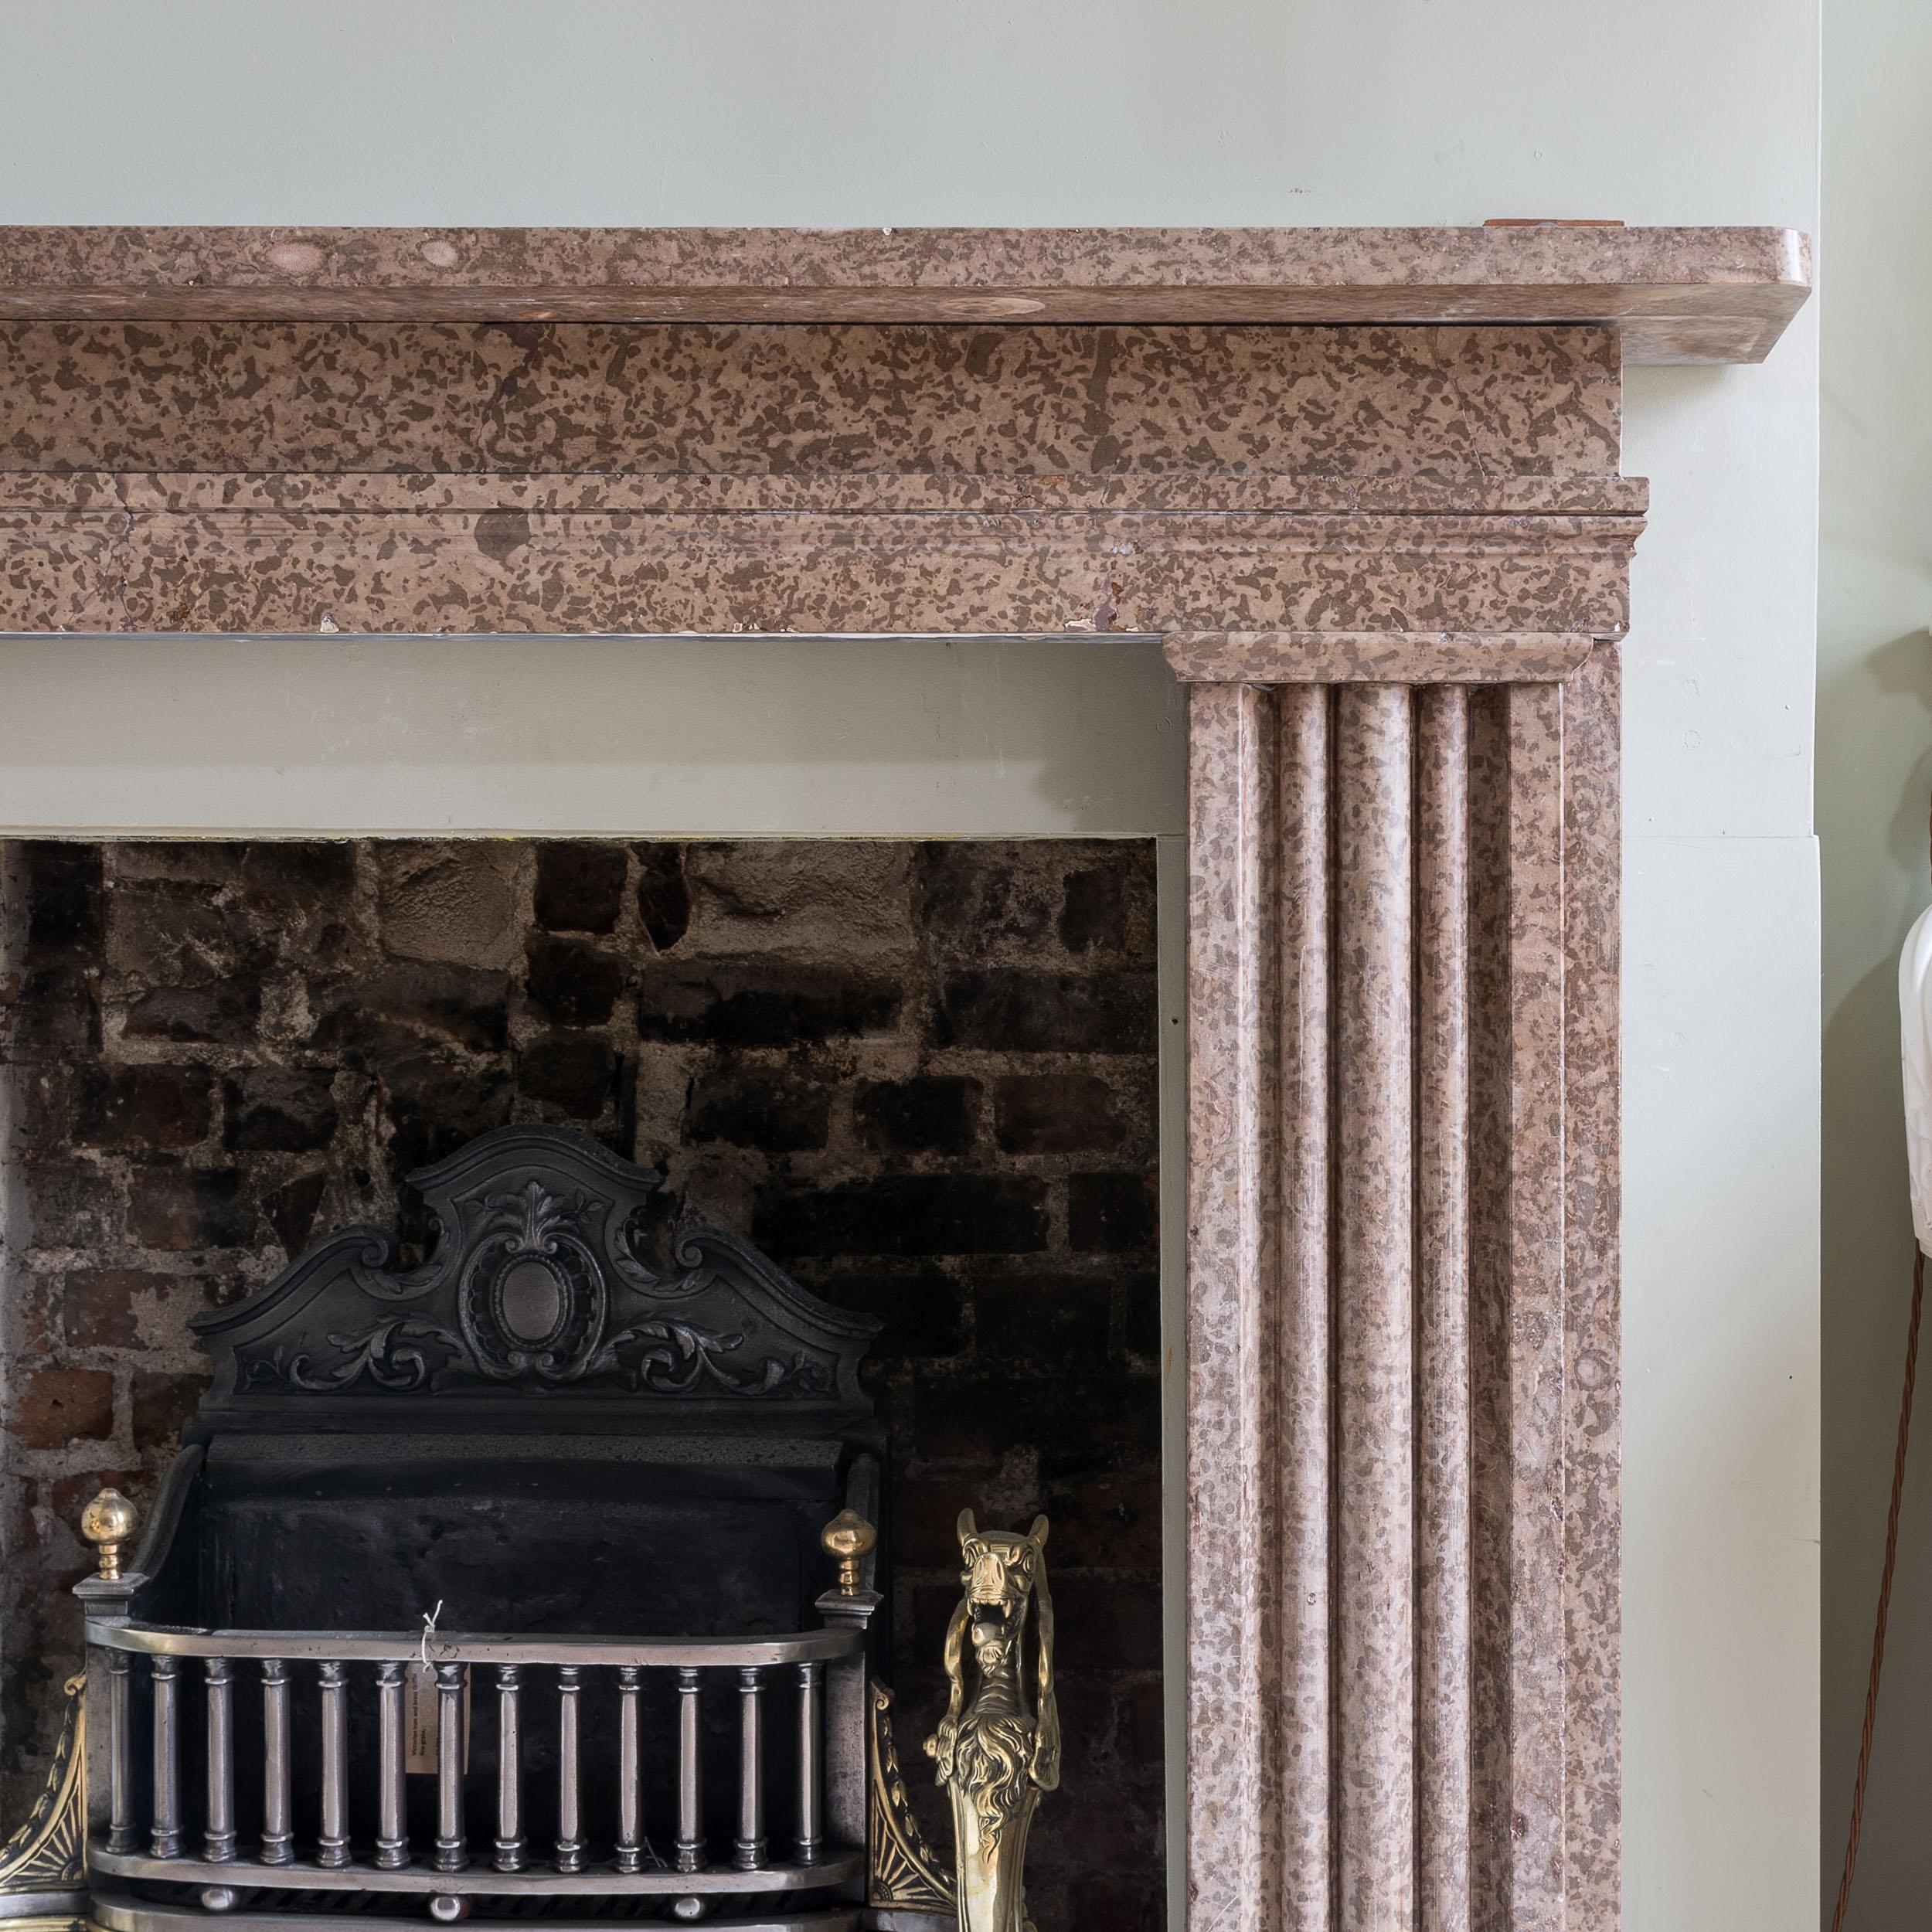 A George IV Derbyshire limestone fireplace, the frieze with plain shelf on deep-moulded jambs and square footblocks.

Measures : Opening width 91.5 cm x 101.5 cm high, outside jamb to jamb width 146 cm.